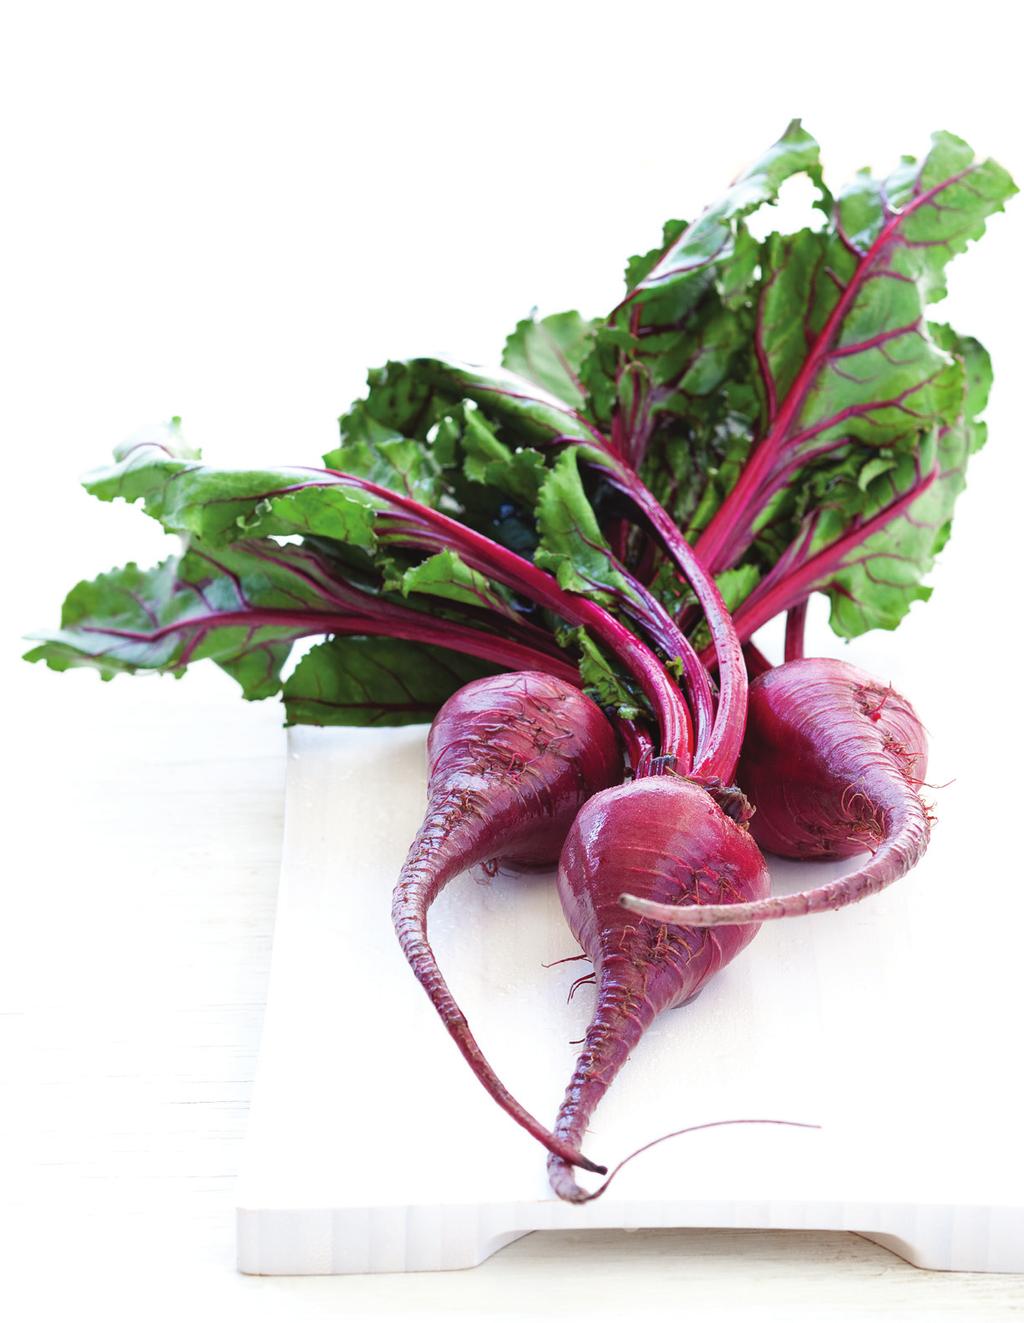 Sweet Beets Delicate, gorgeous and easy to prepare, beets are filled with disease-fighting nutrients.